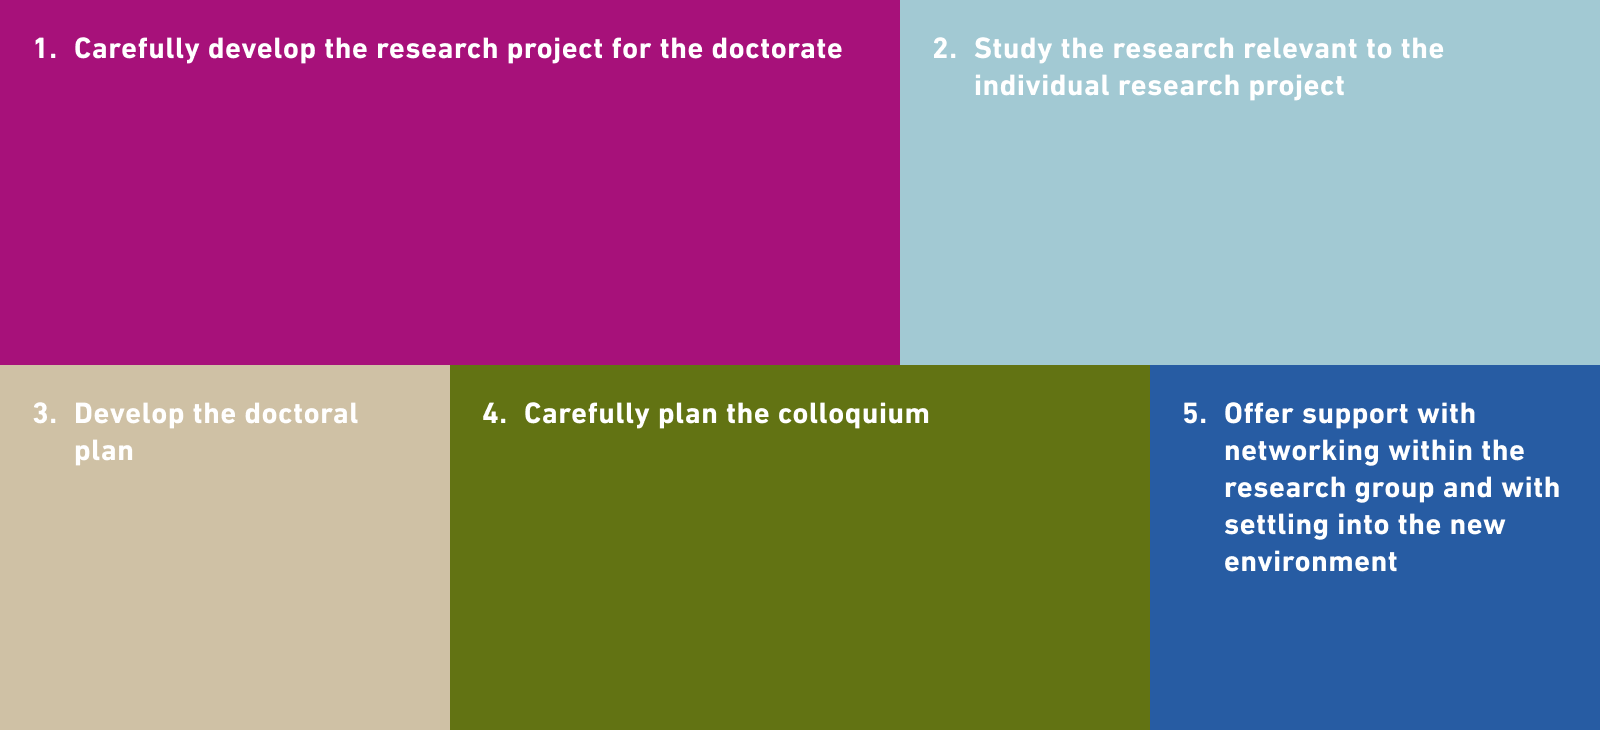 1. Carefully develop the research project for the doctorate 2. Study the research relevant to the individual research project 3. Develop the doctoral plan 4. Carefully plan the colloquium 5. Offer support with networking within the research group and with settling into the new environment